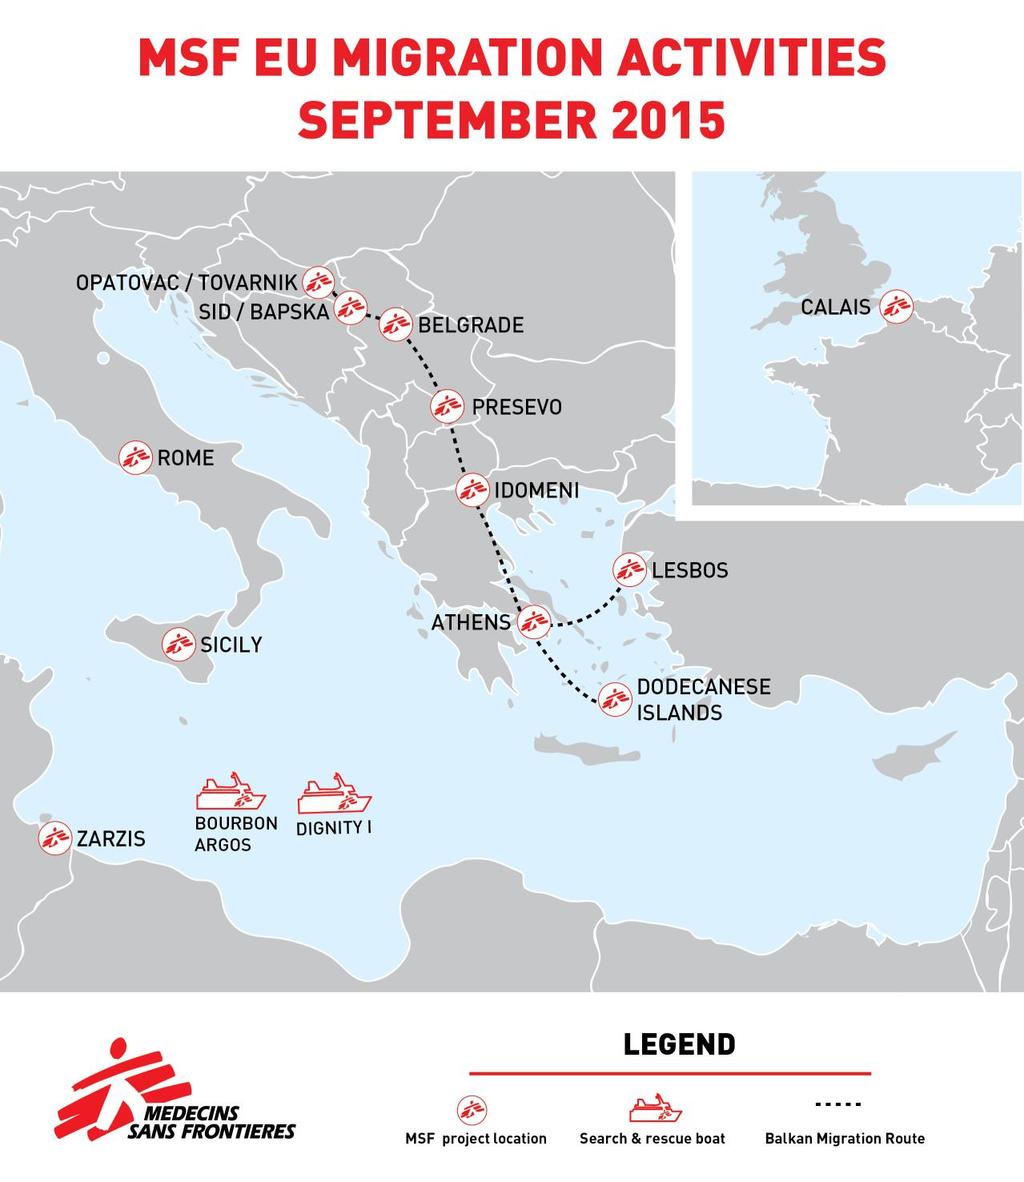 CRISIS INFO # 9: MSF EUROPEAN MIGRATION - 25 September 2015 BACKGROUND: Overall, the number of arrivals by boat to Europe has already passed the 219,000 figure of 2014 numbers with the UNHCR